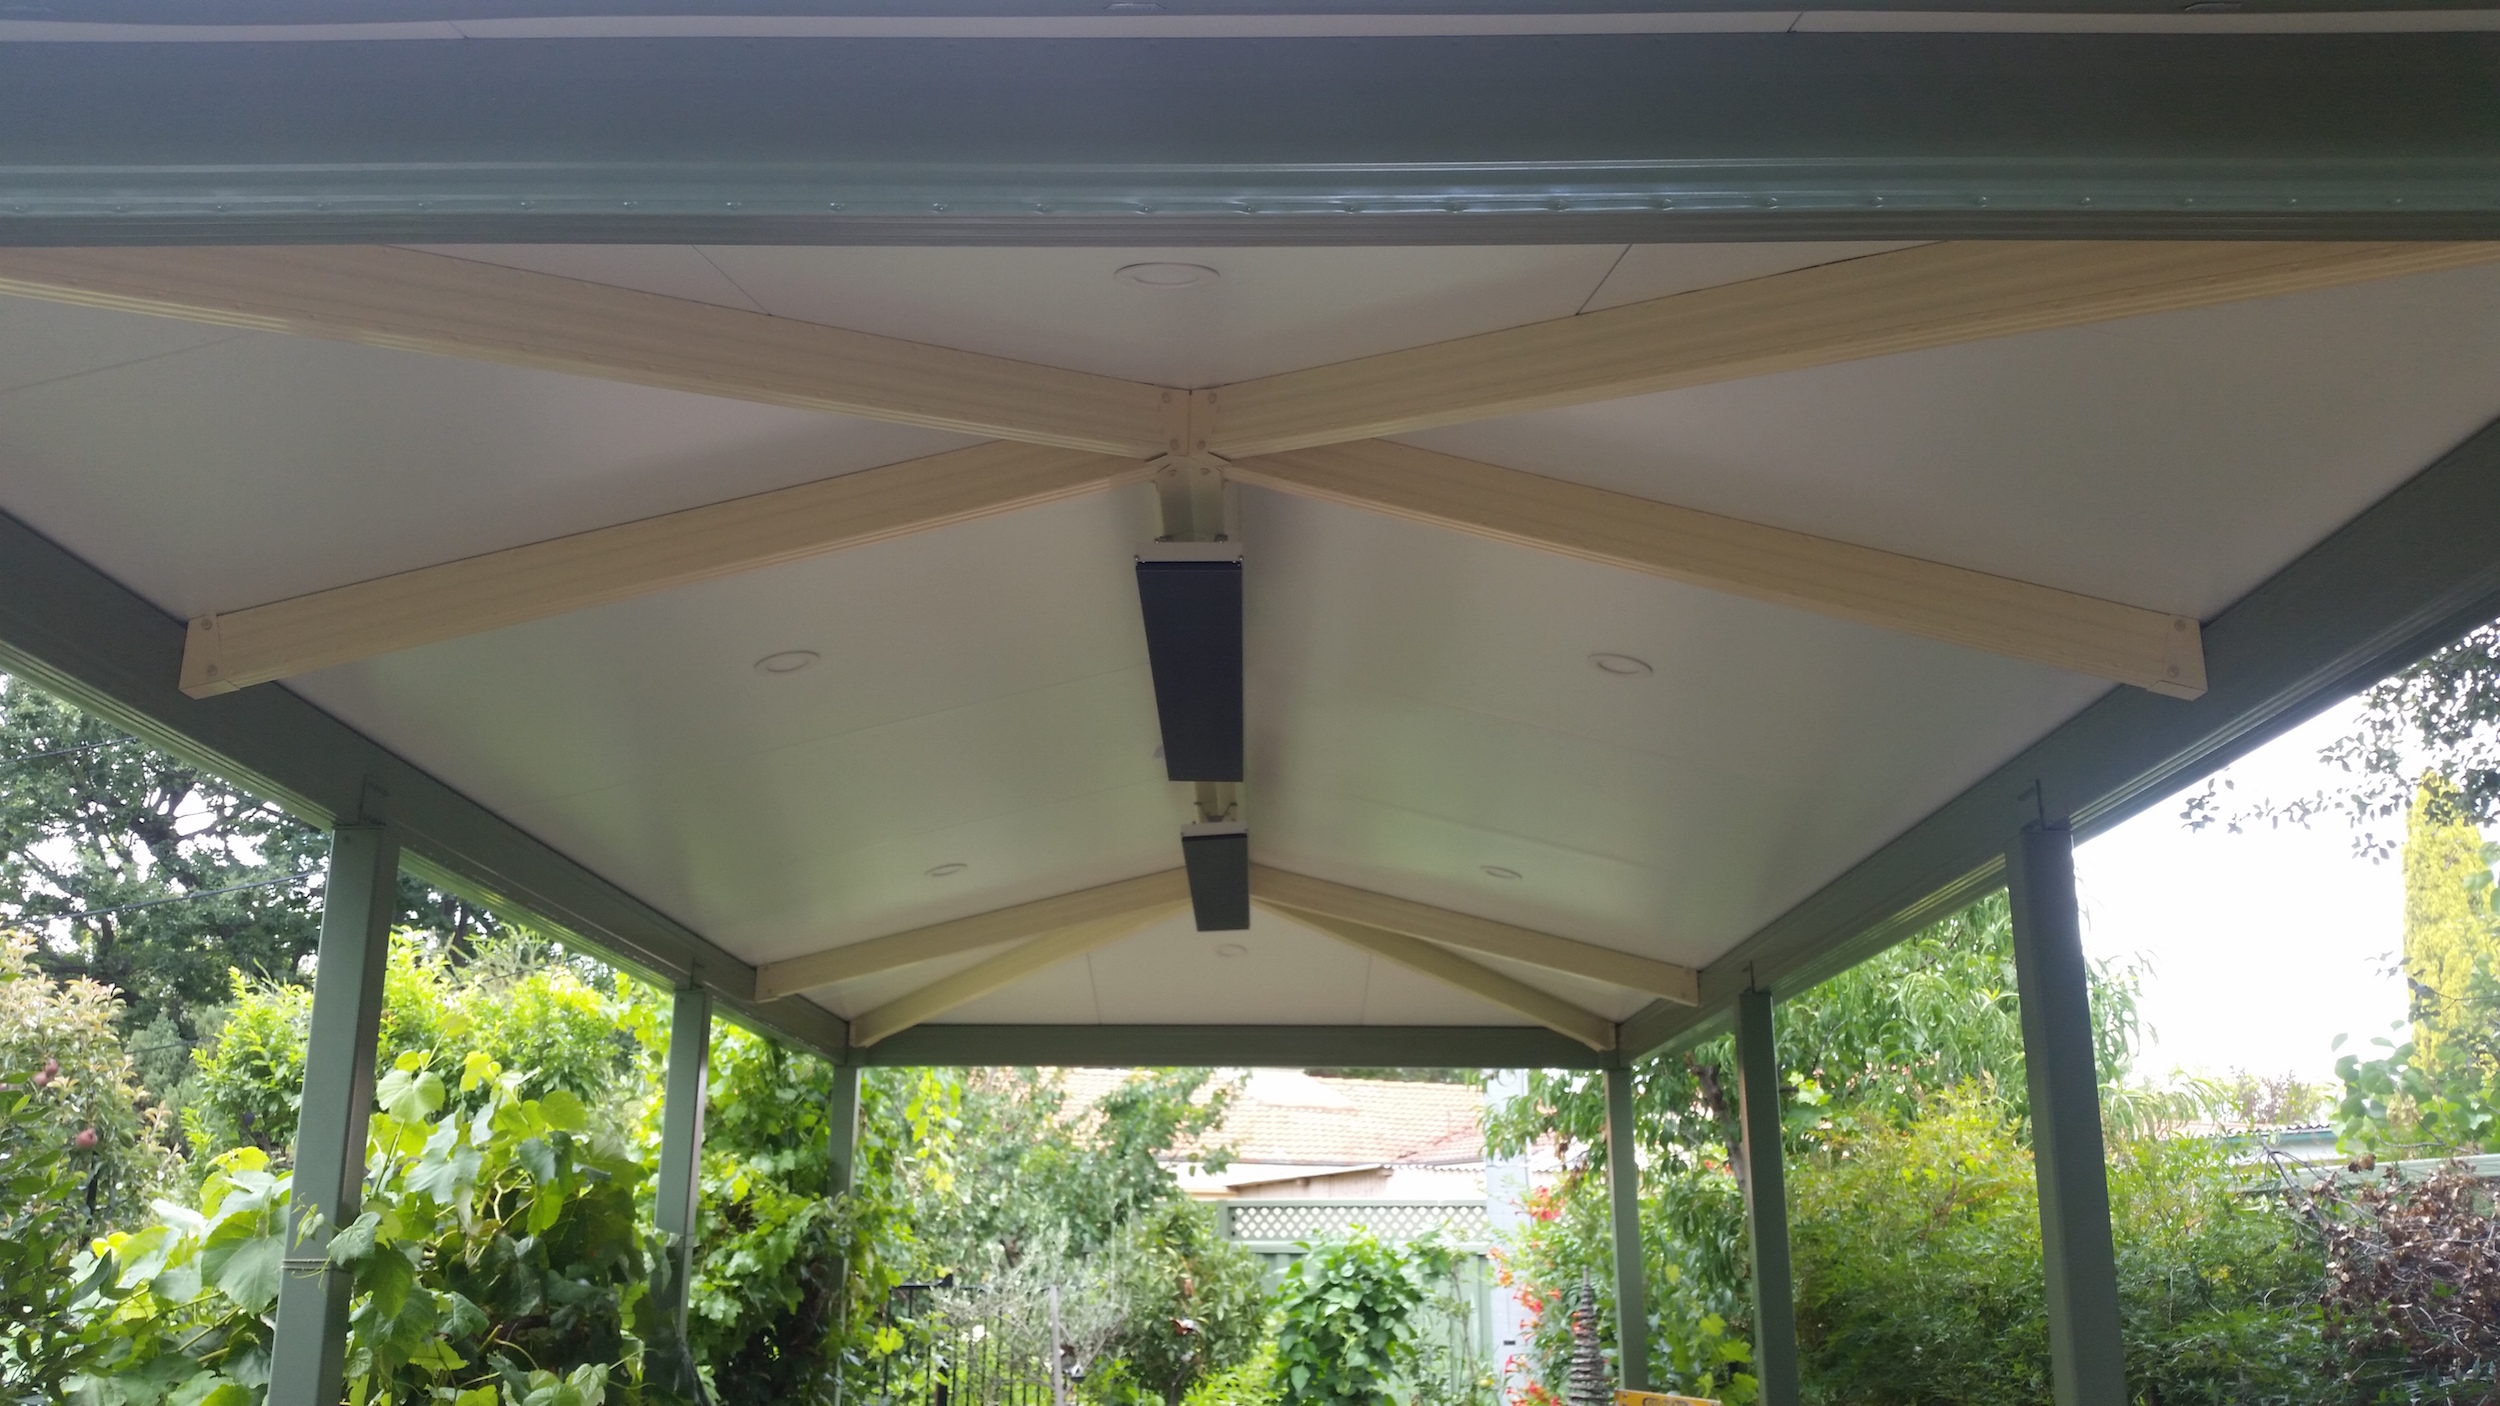 Hipped roof pergola awning